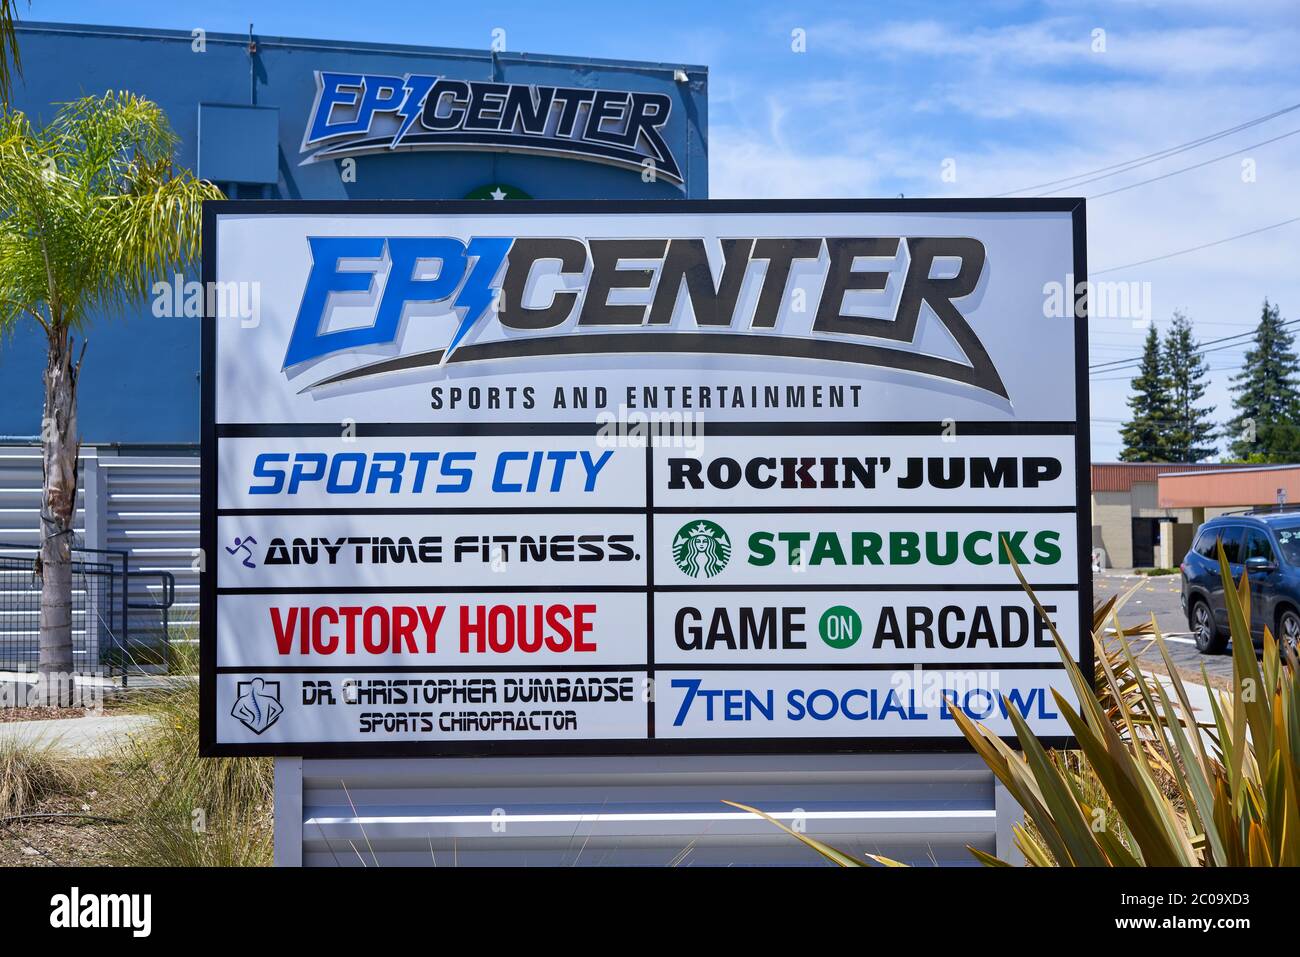 Epicenter sports and entertainment multi-business complex with monument sign in front in Santa Rosa, California, USA. Stock Photo